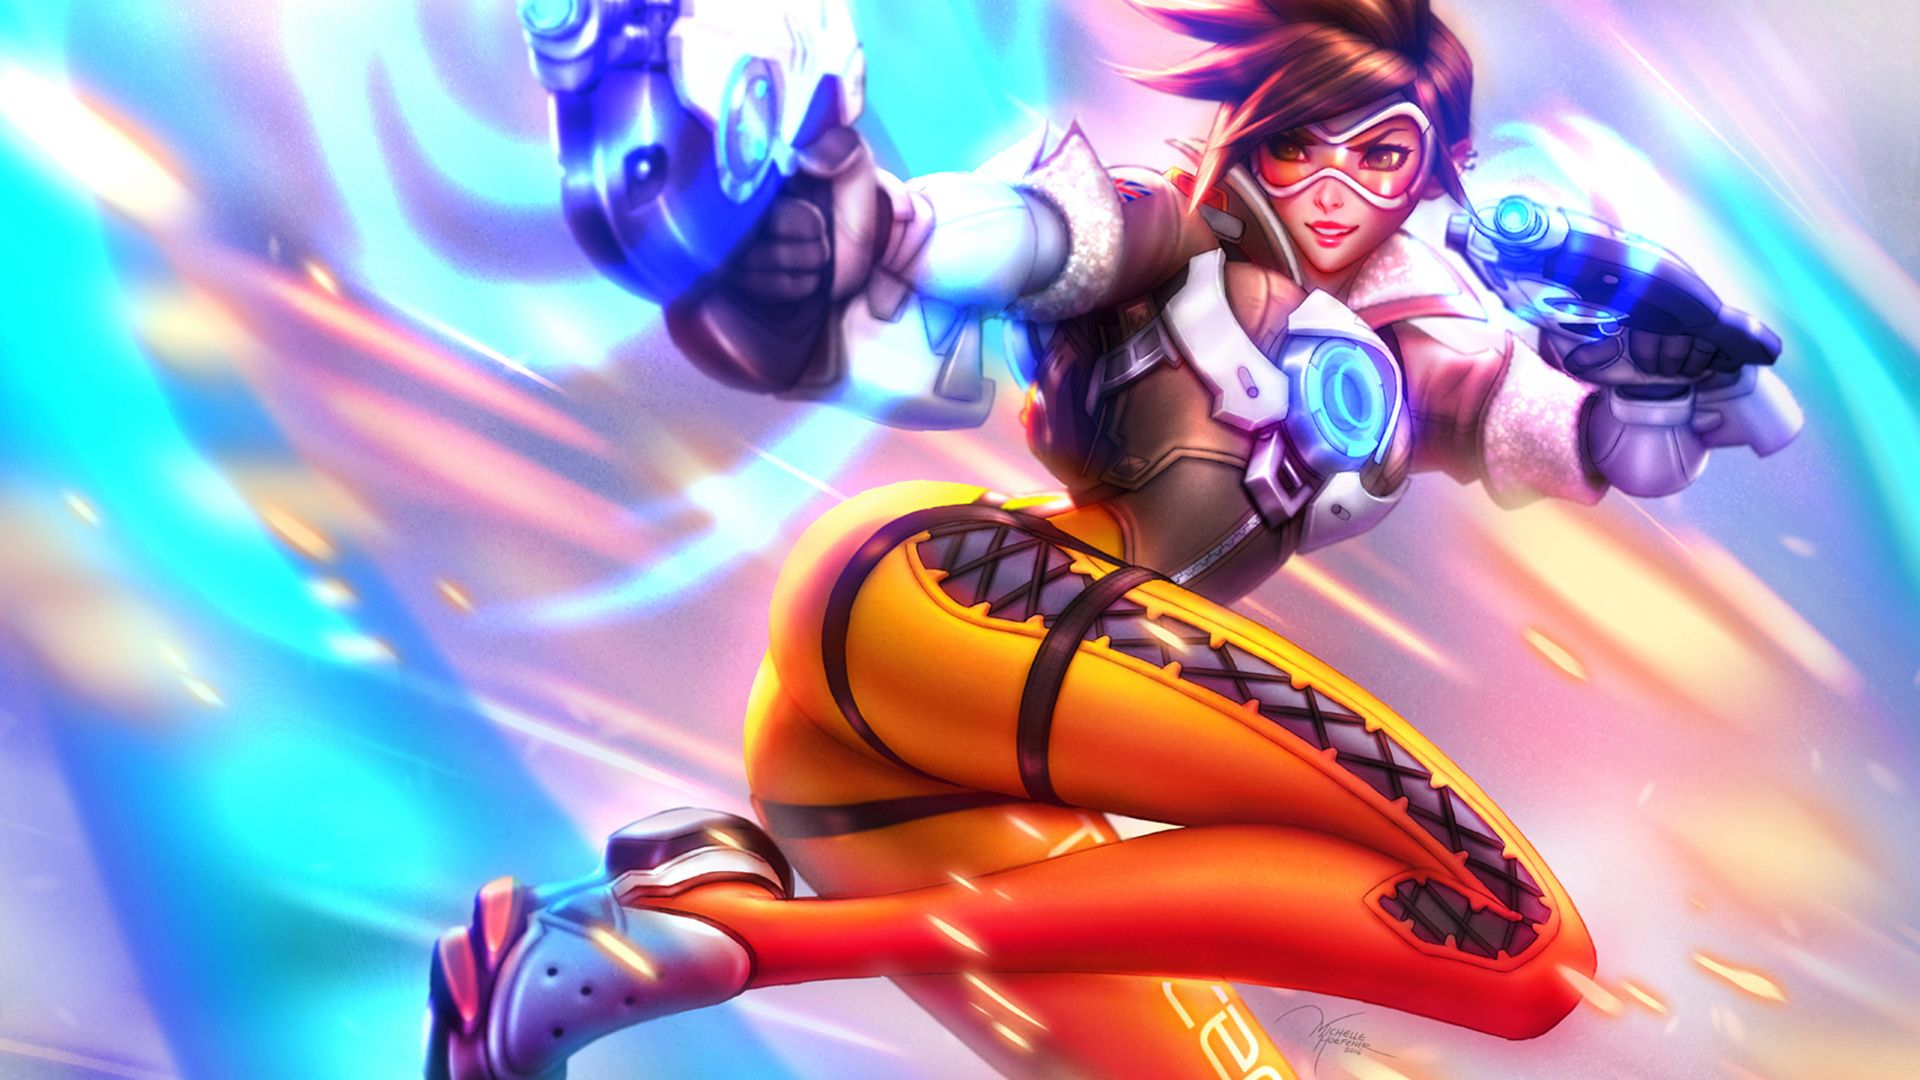 Wallpaper Tracer, girl, overwatch game, video game